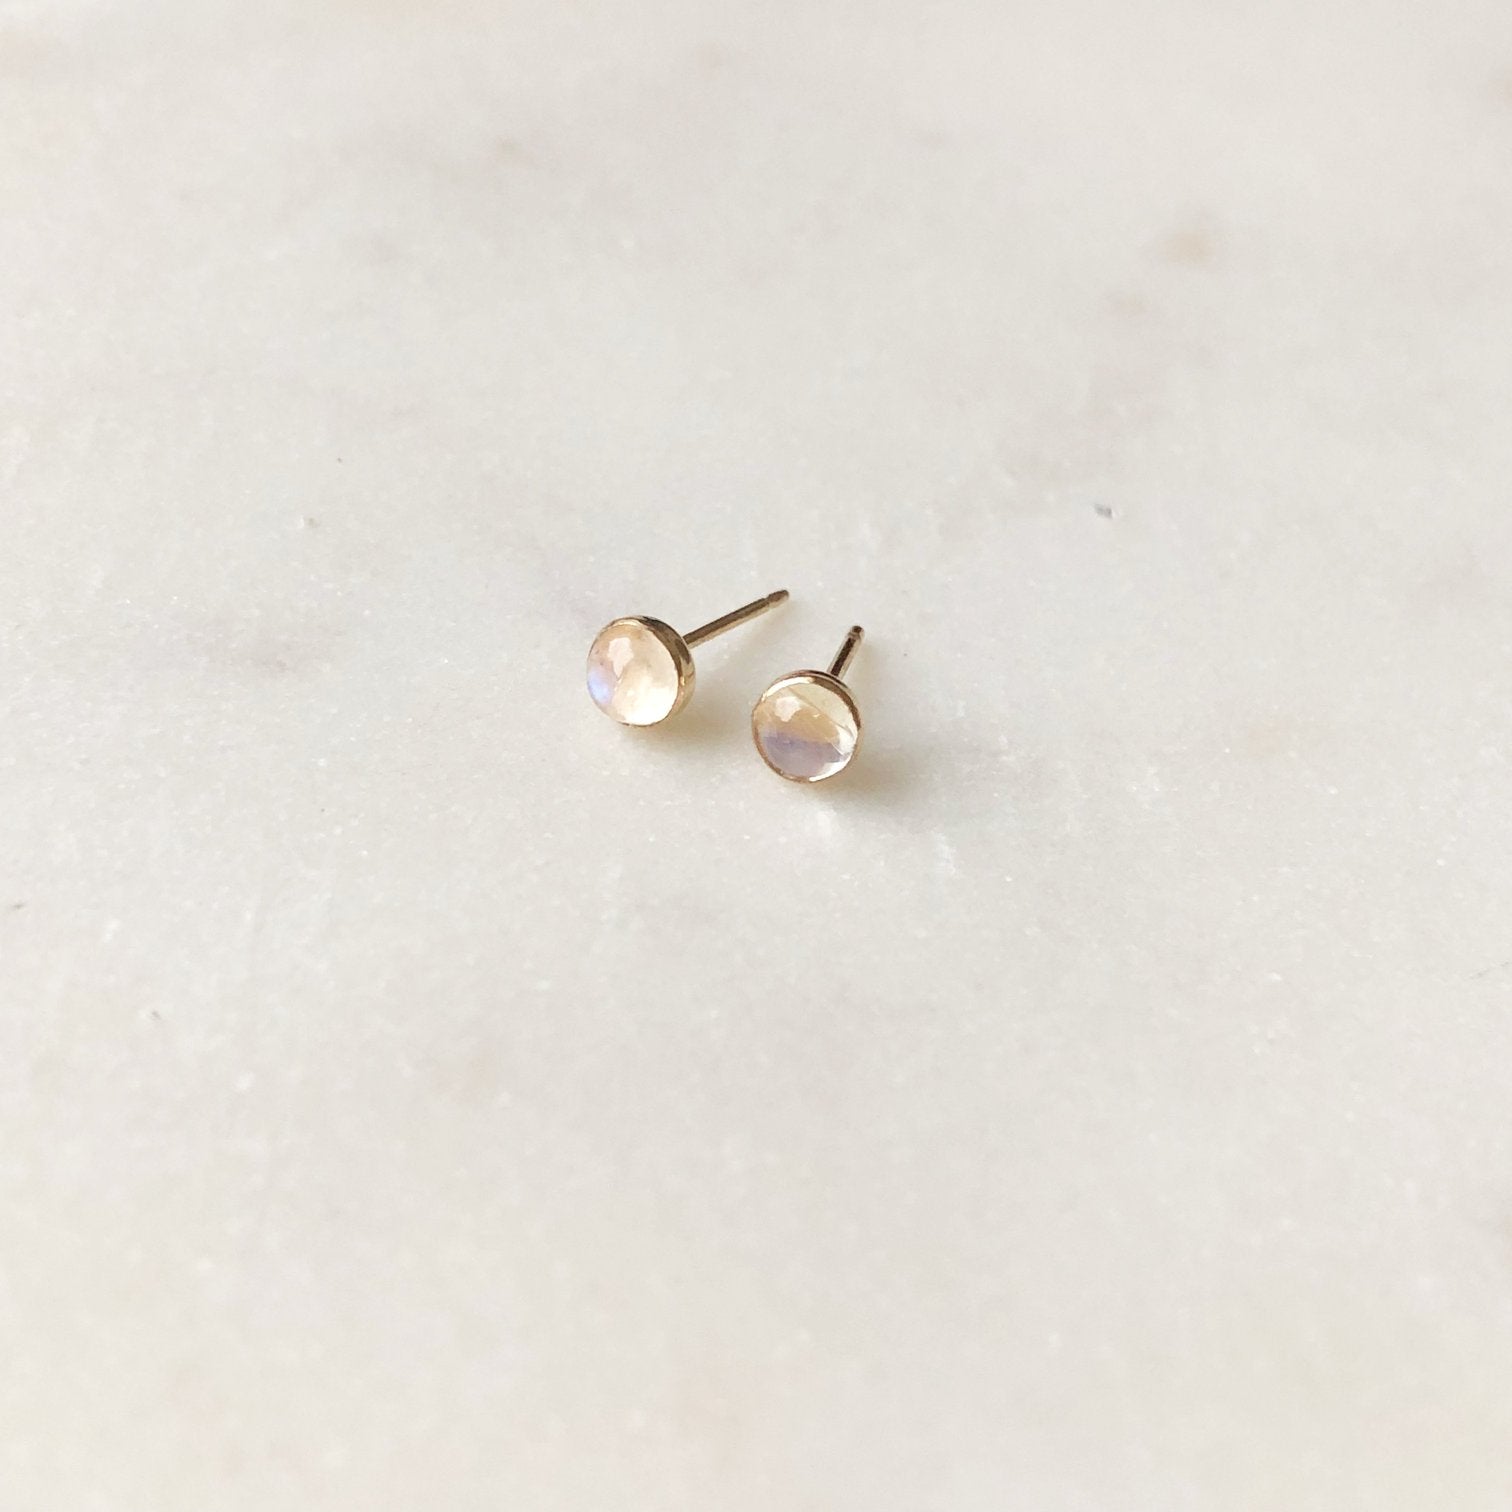 The Rainbow Moonstone Studs by Token Jewelry